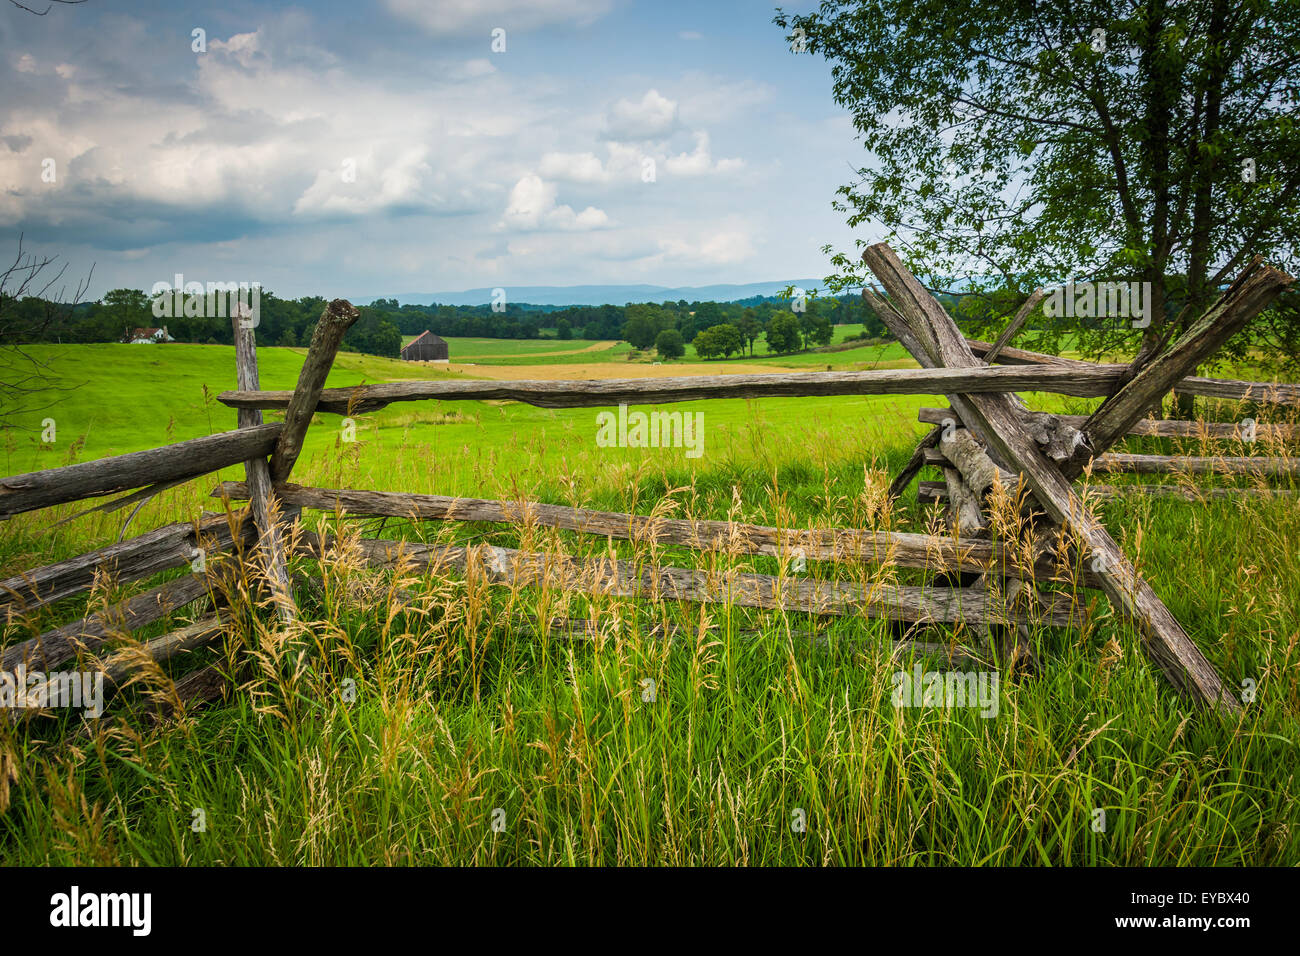 Fence and tree in a field at Antietam National Battlefield, Maryland. Stock Photo